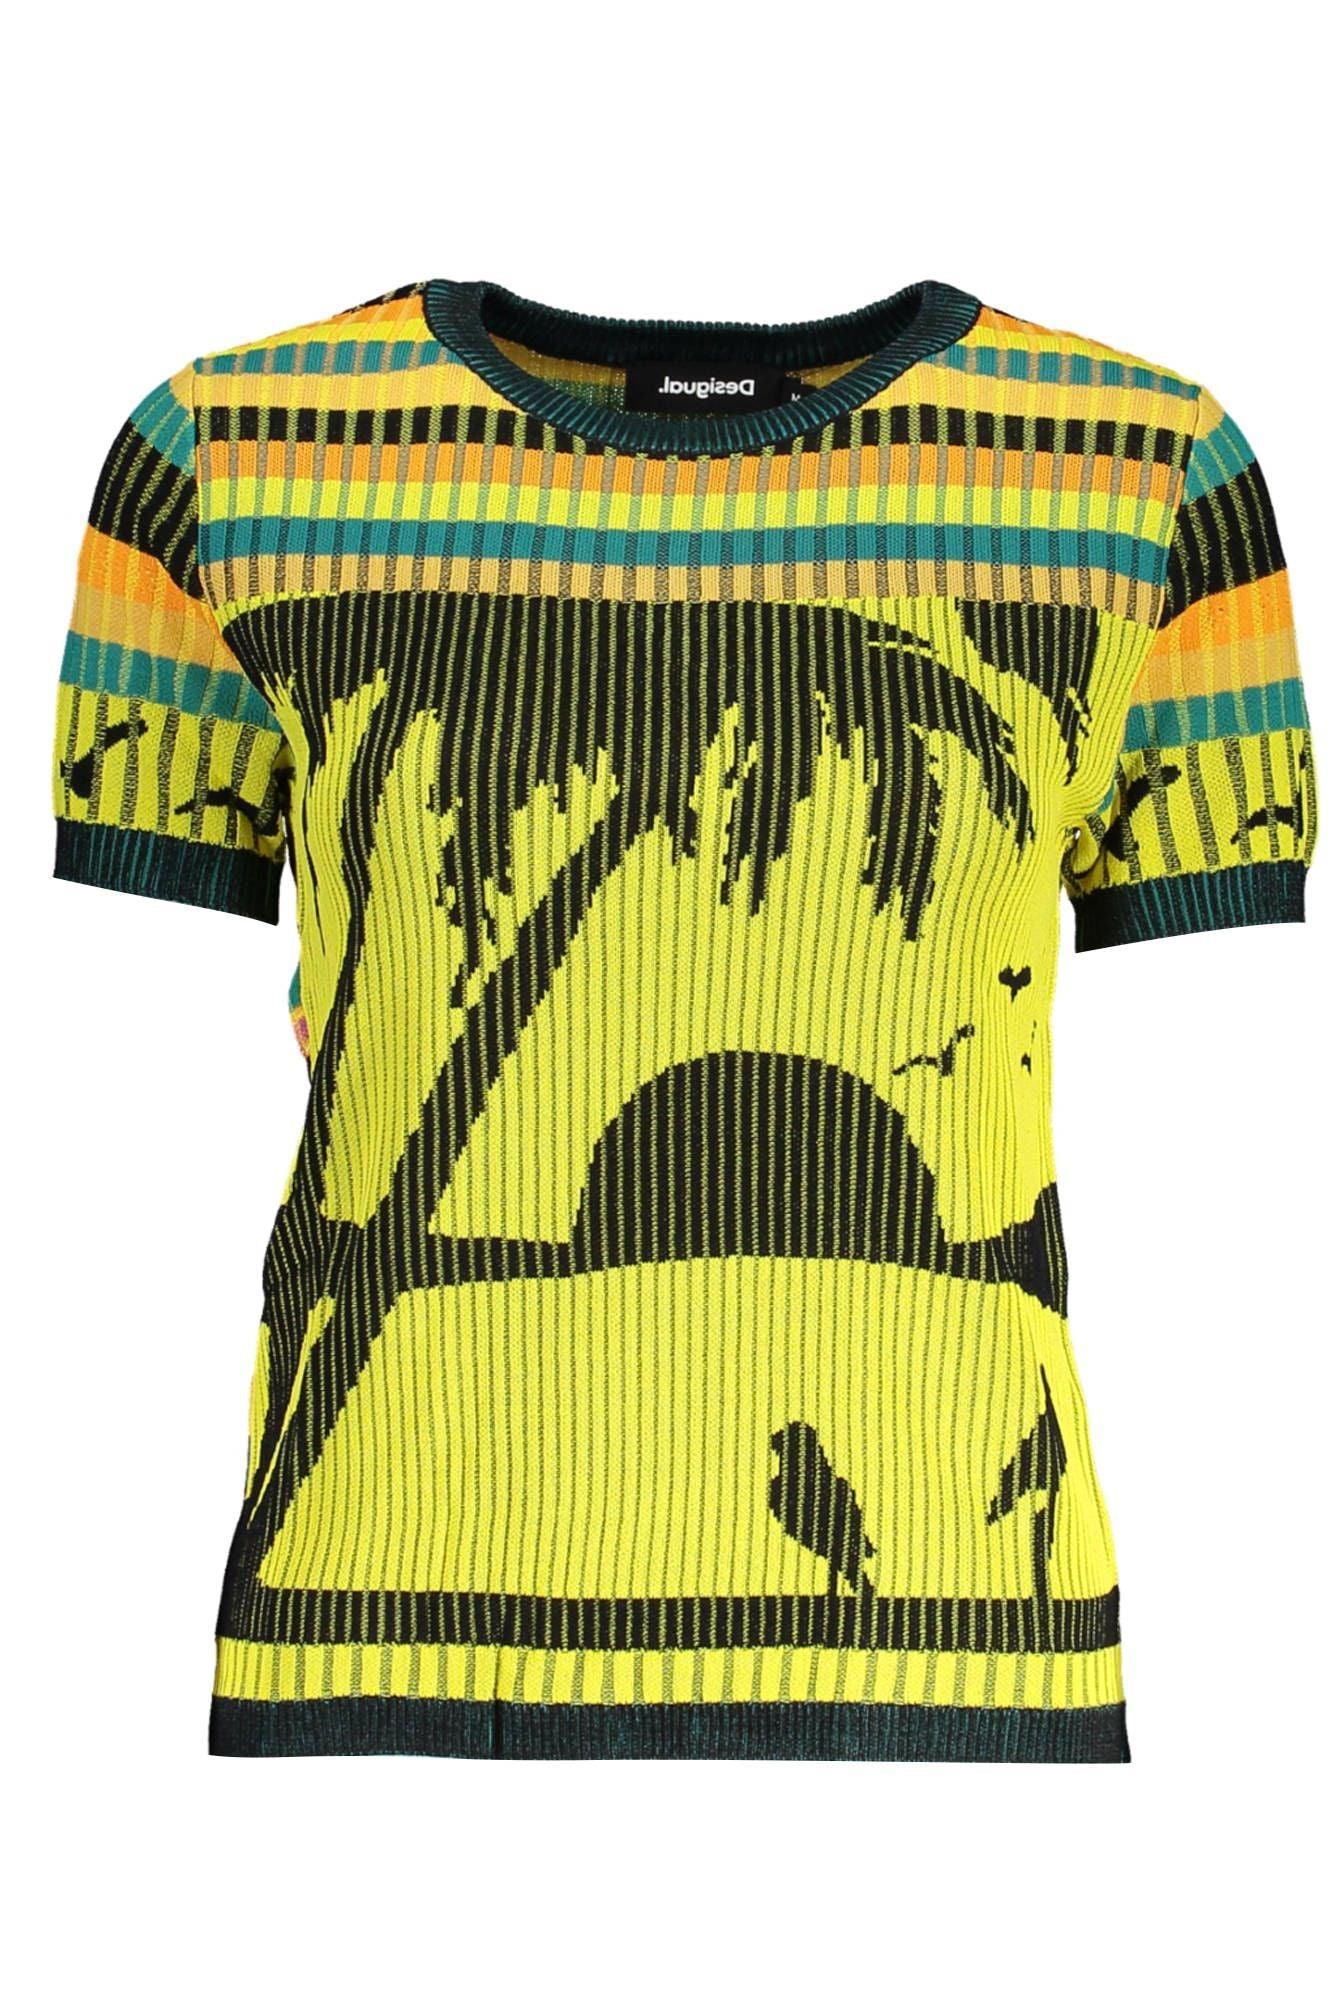 Desigual Chic Sunset Yellow Contrast Detail Top - PER.FASHION